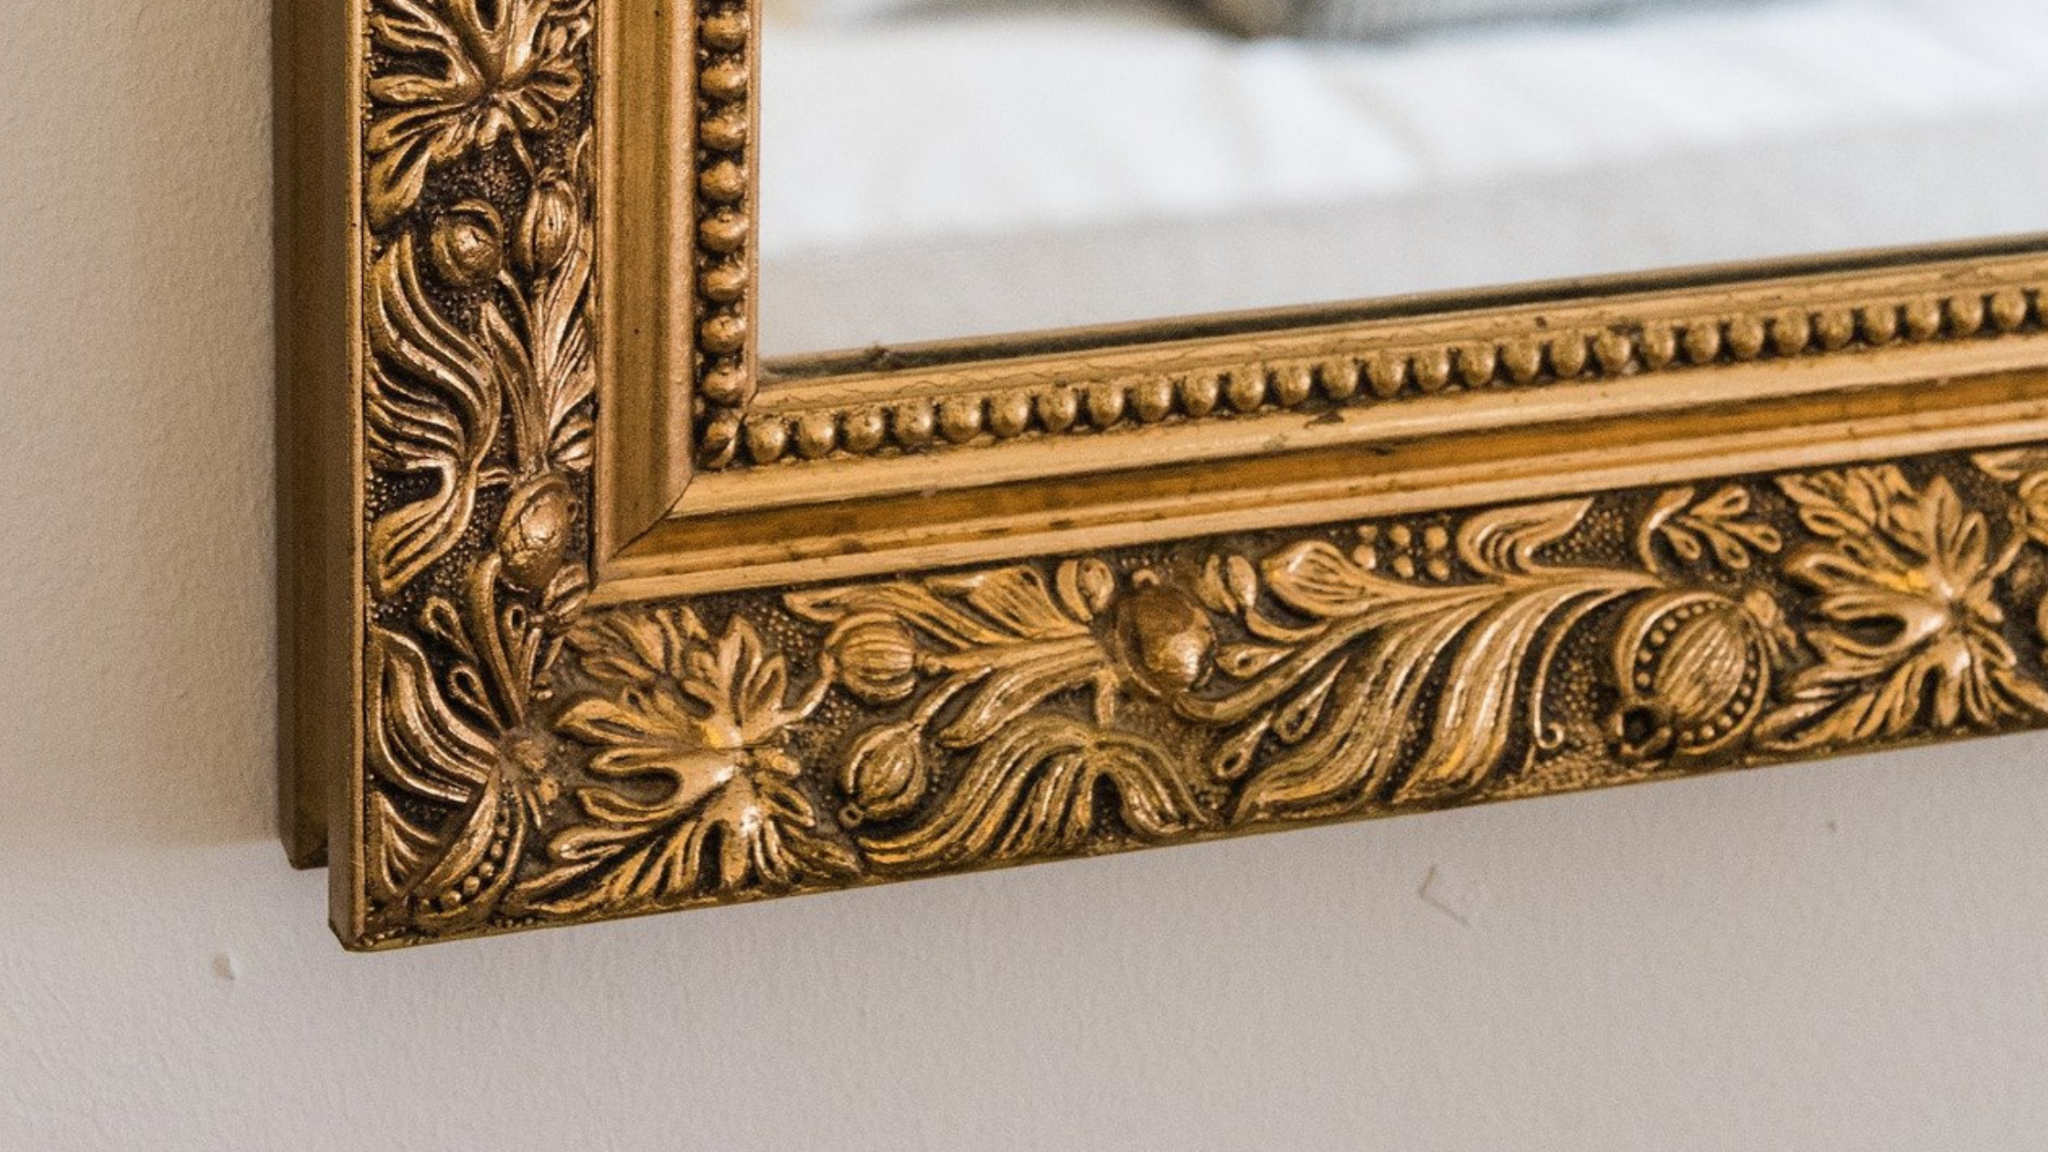 How to Care For Your Antique Mirrors - Bespoke Mirrors